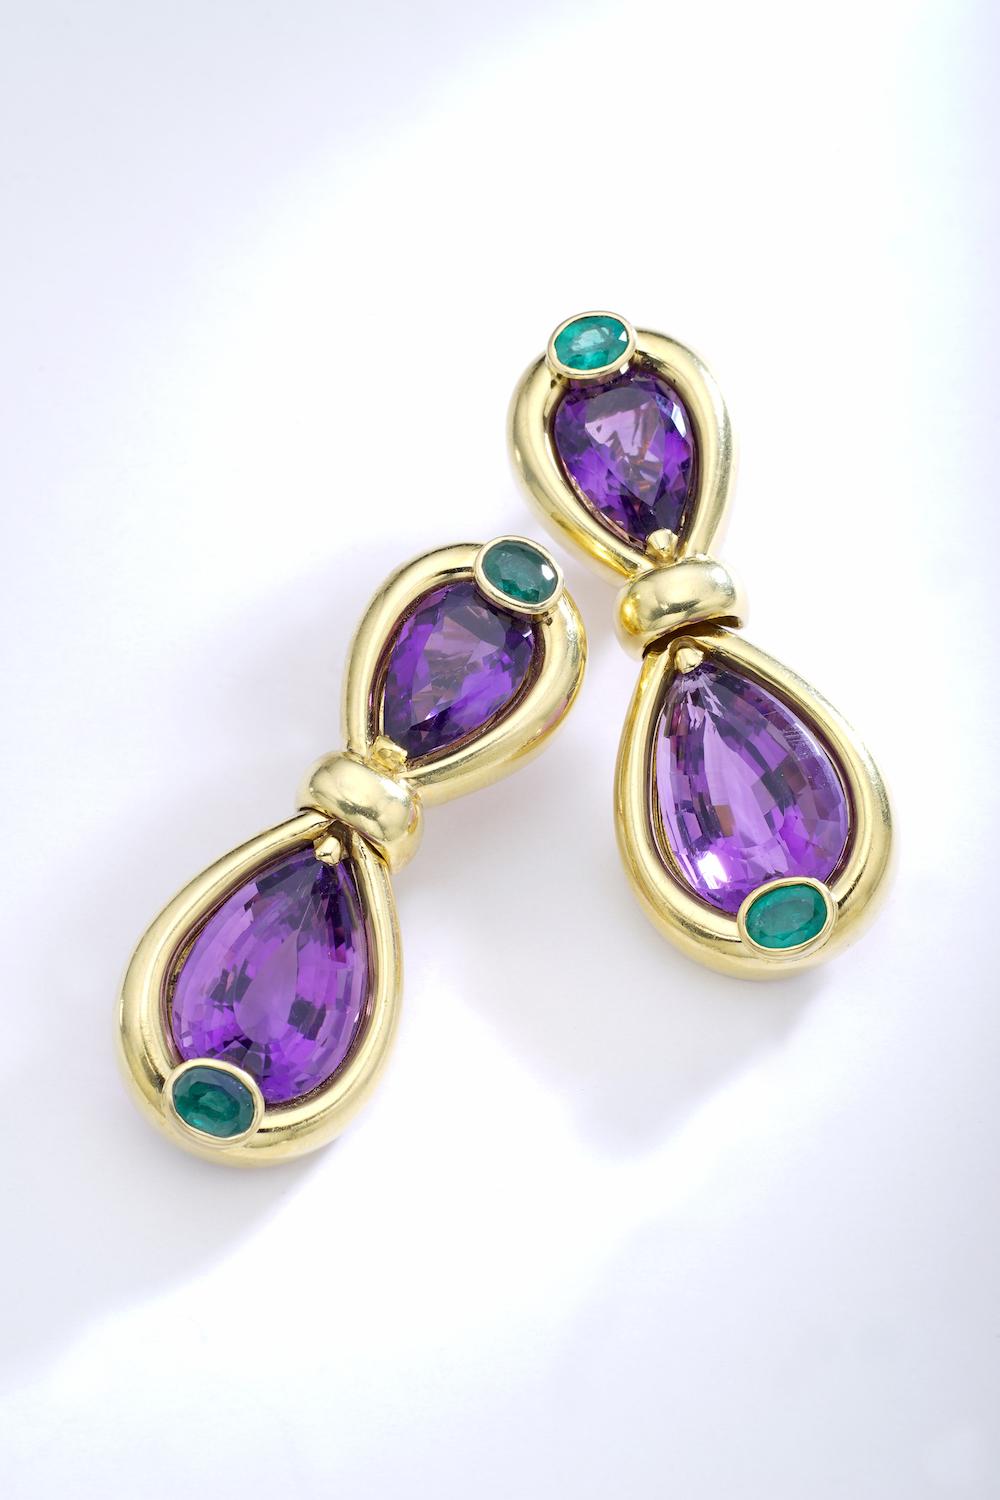 emerald and amethyst combination